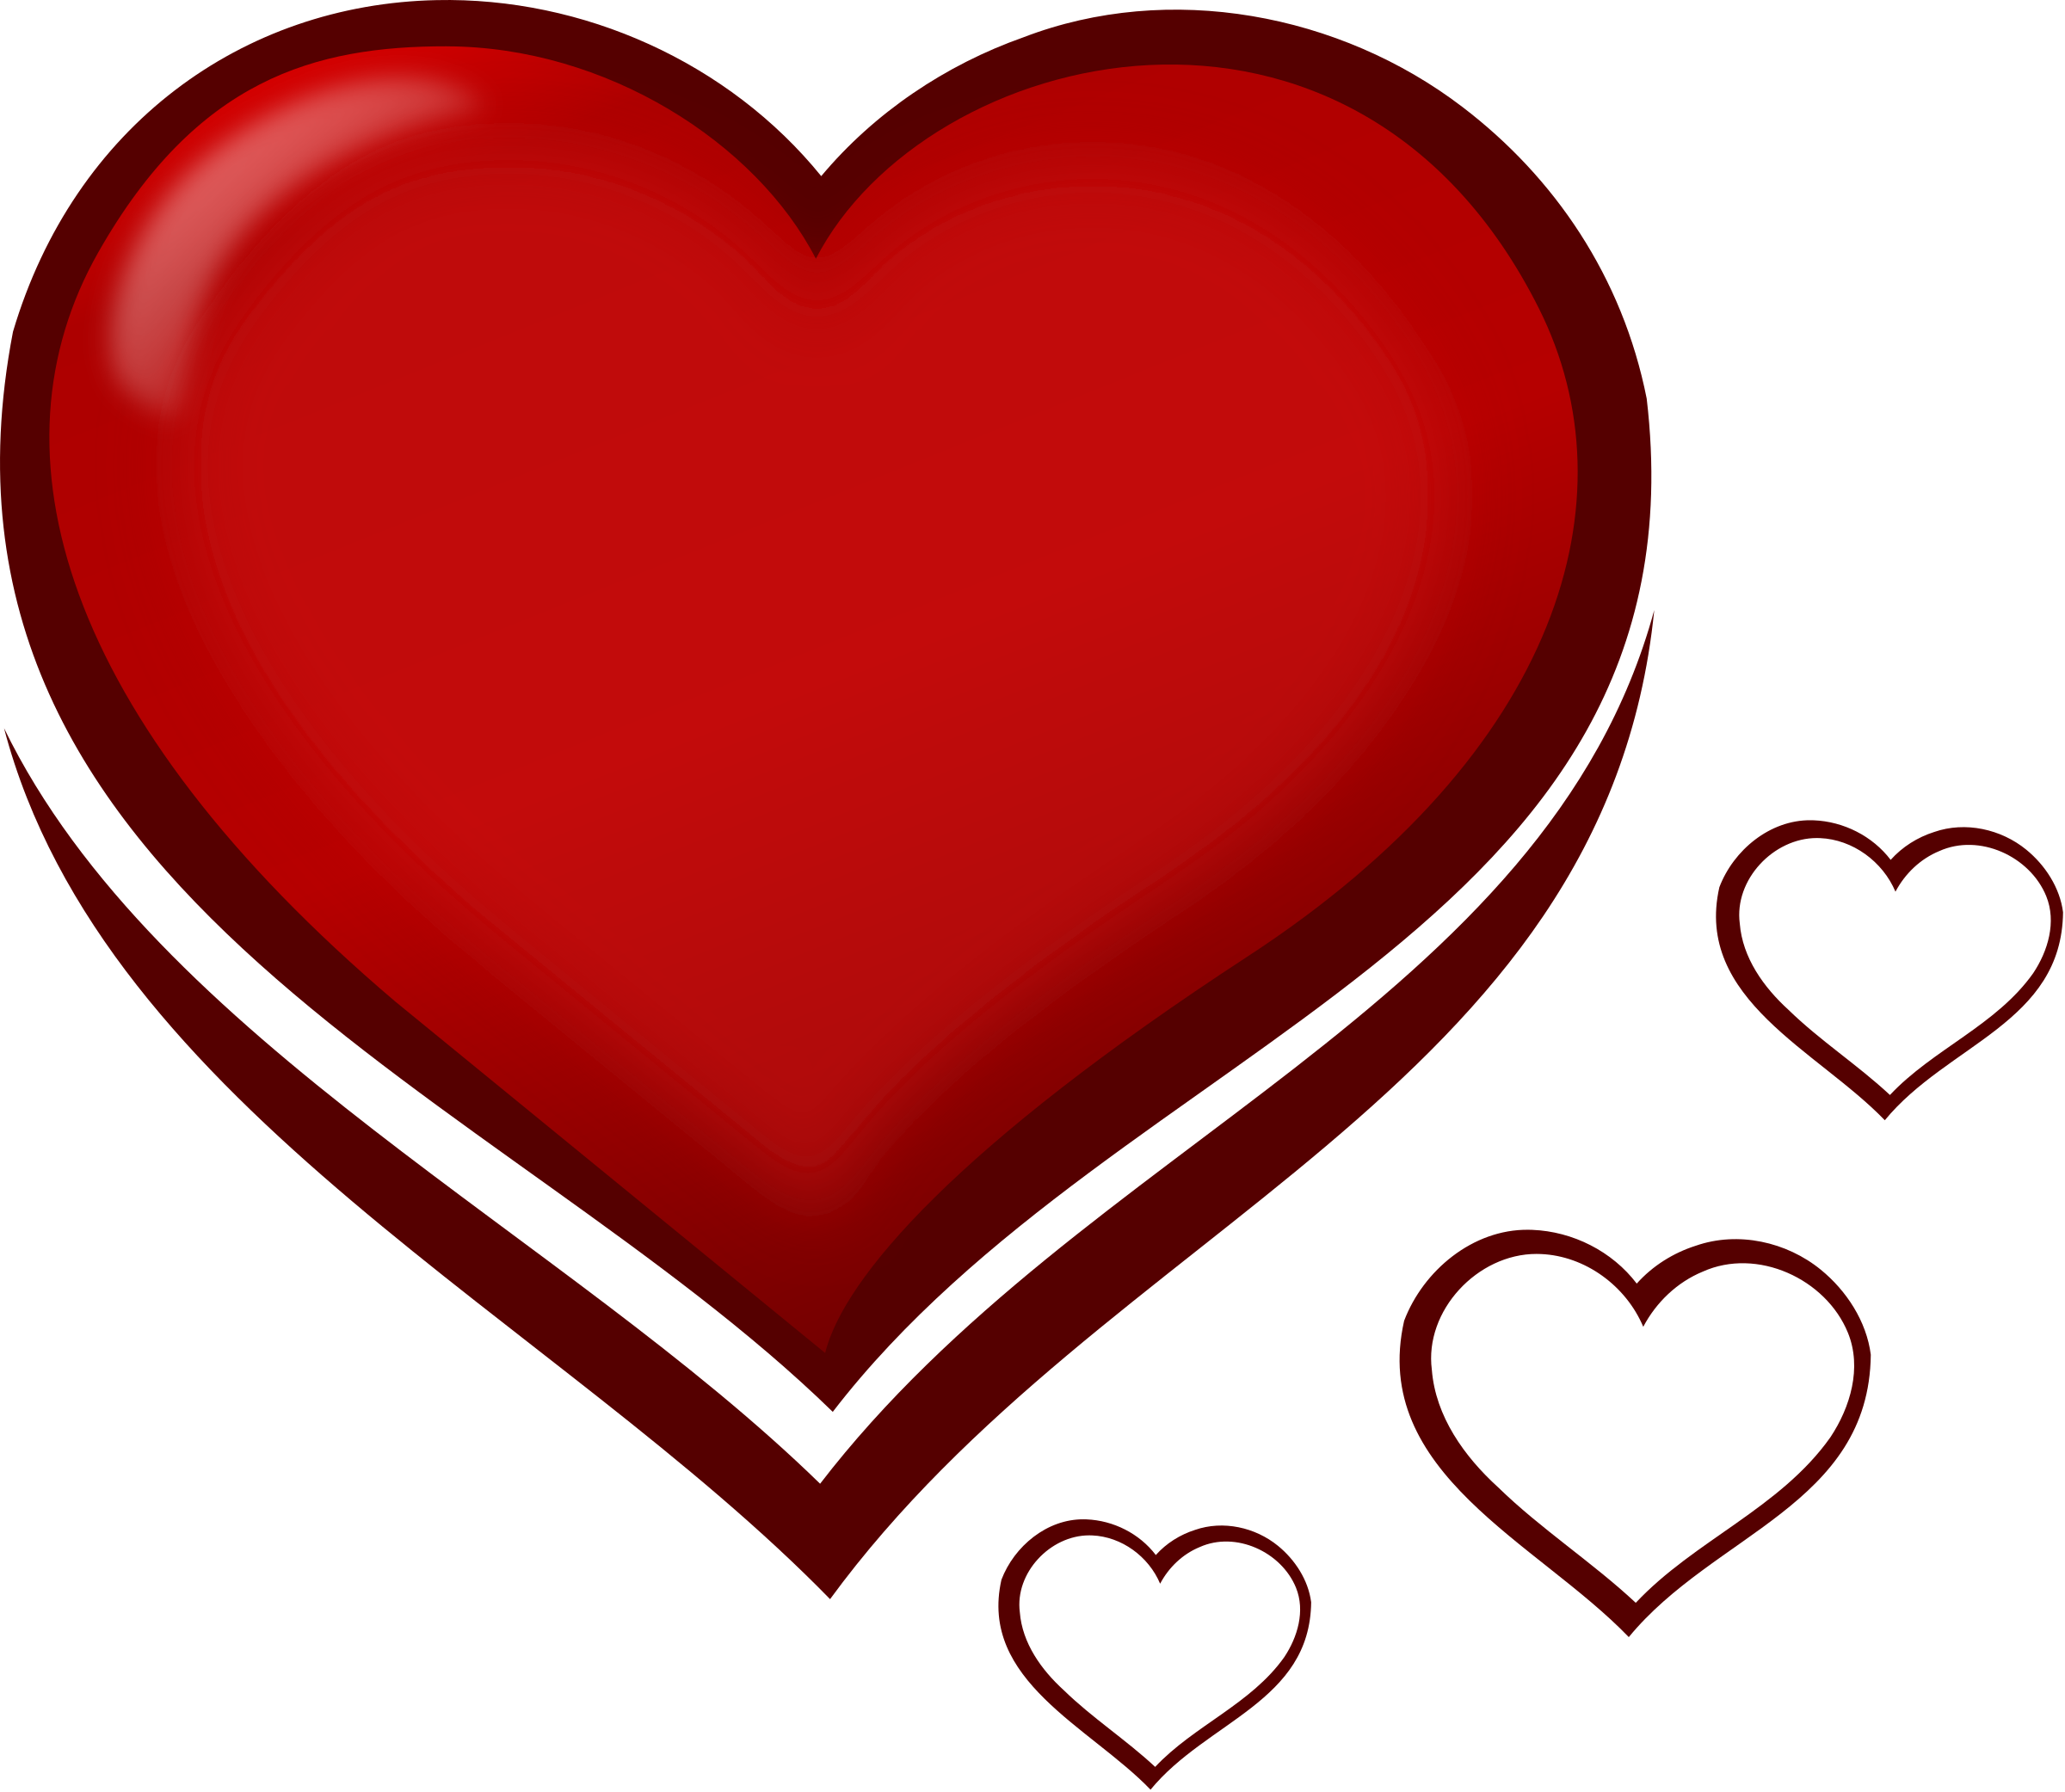 Heart Drawings PNG Clipart Background